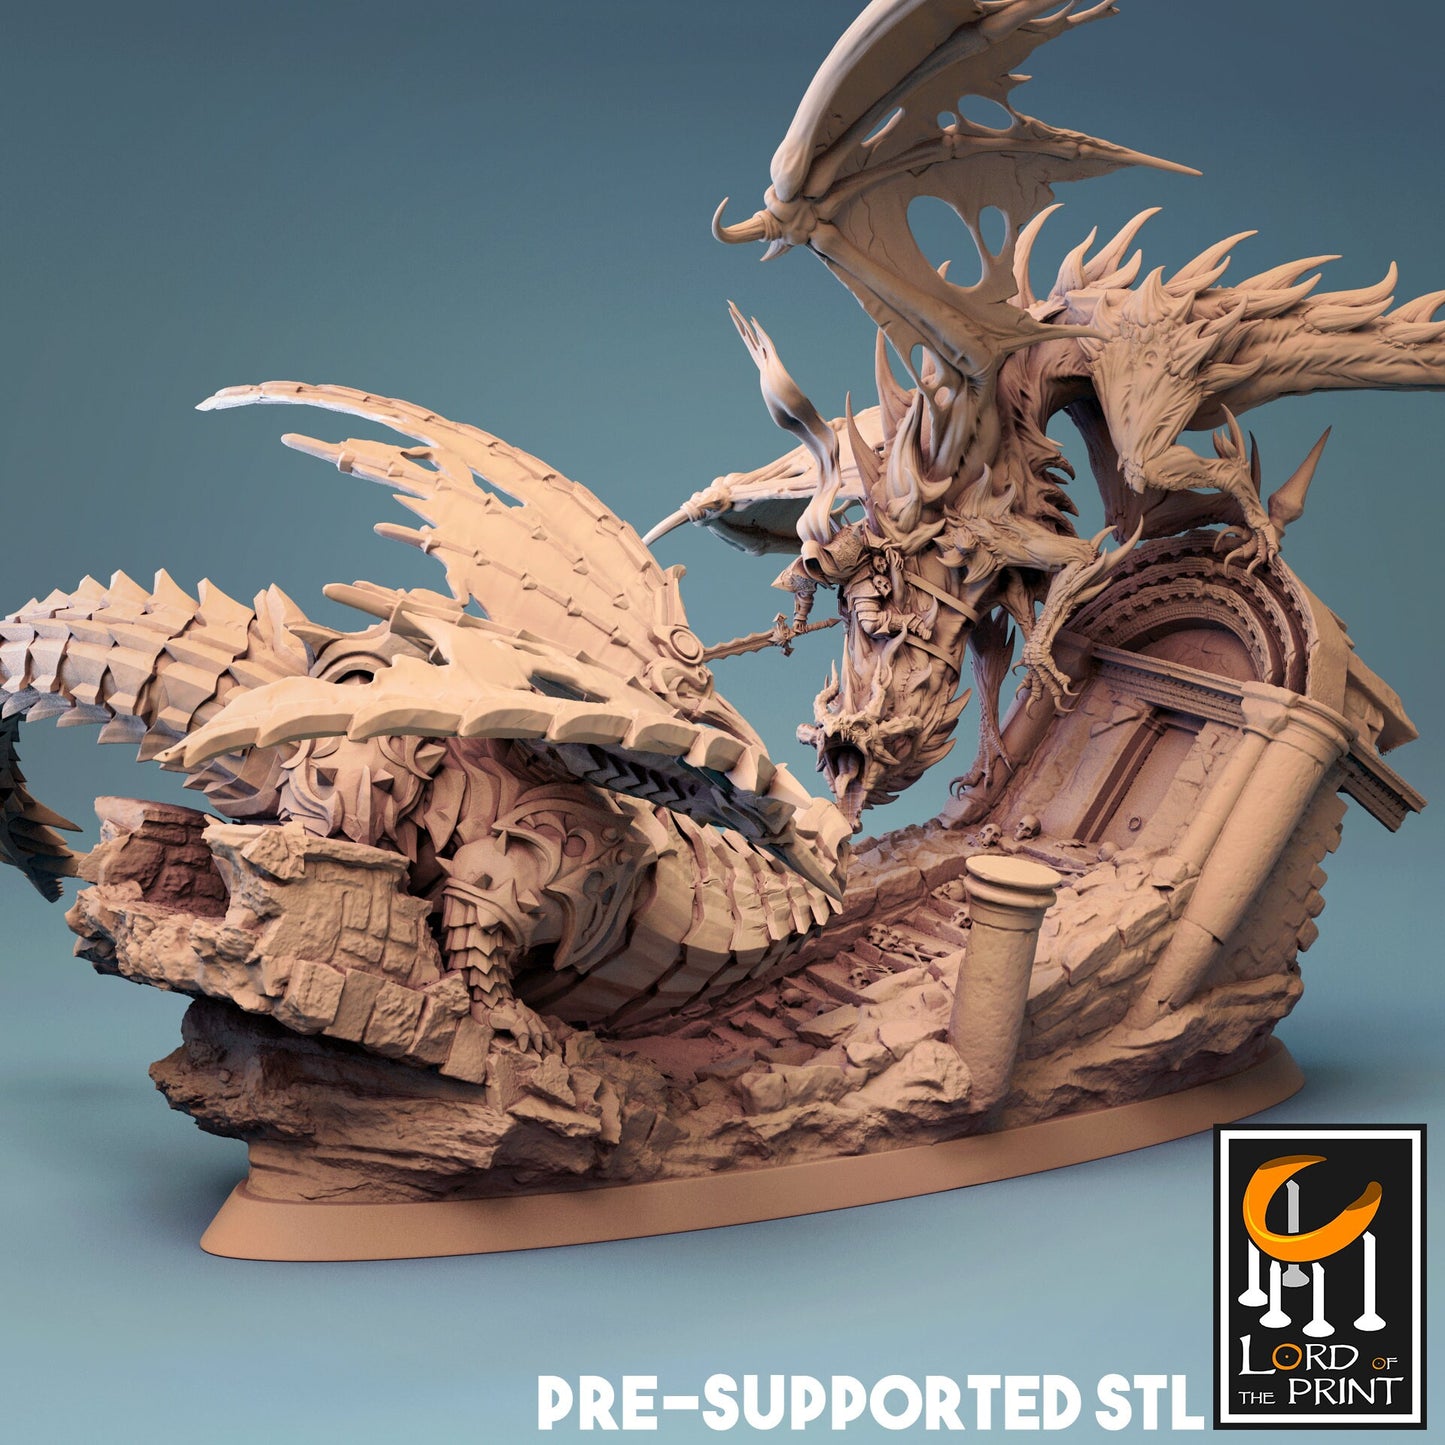 Cursed VS Armored Dragon Miniature, by Lord of the Print // 3D Print on Demand / D&D / Pathfinder / RPG / DRAGON